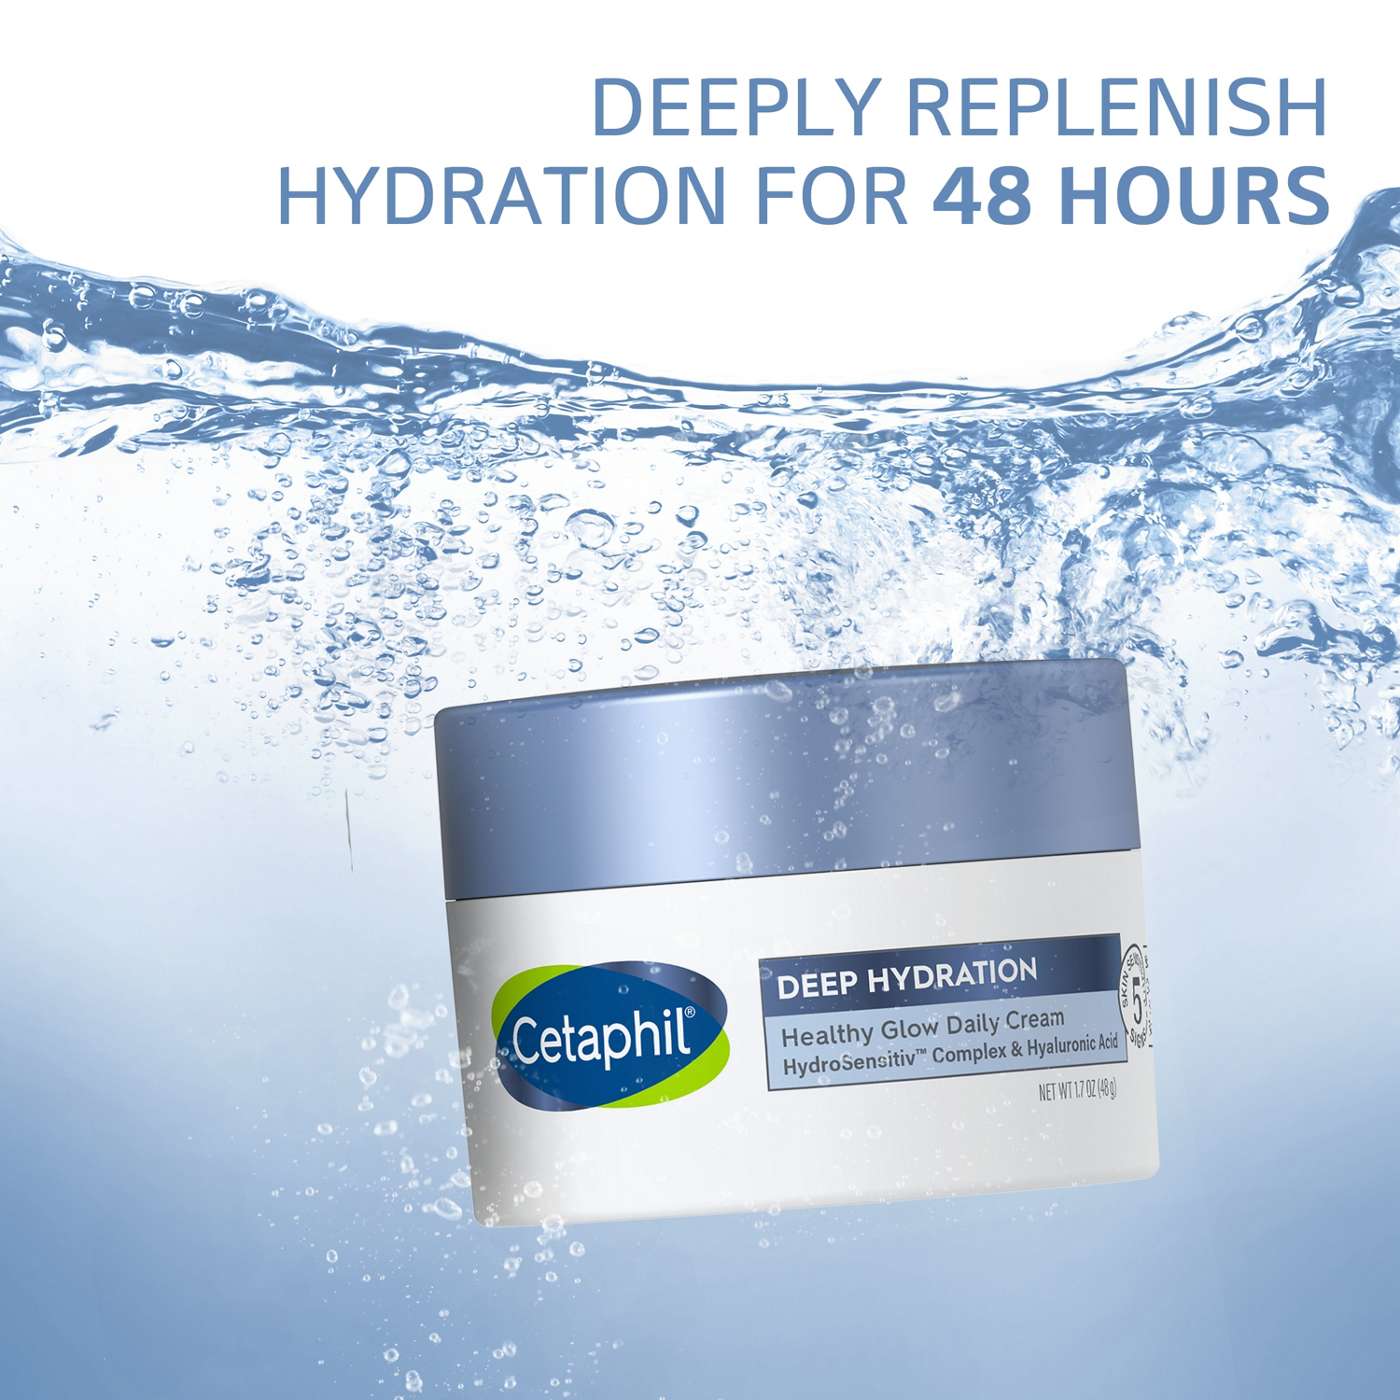 Cetaphil Deep Hydration Healthy Glow Daily Cream; image 8 of 8